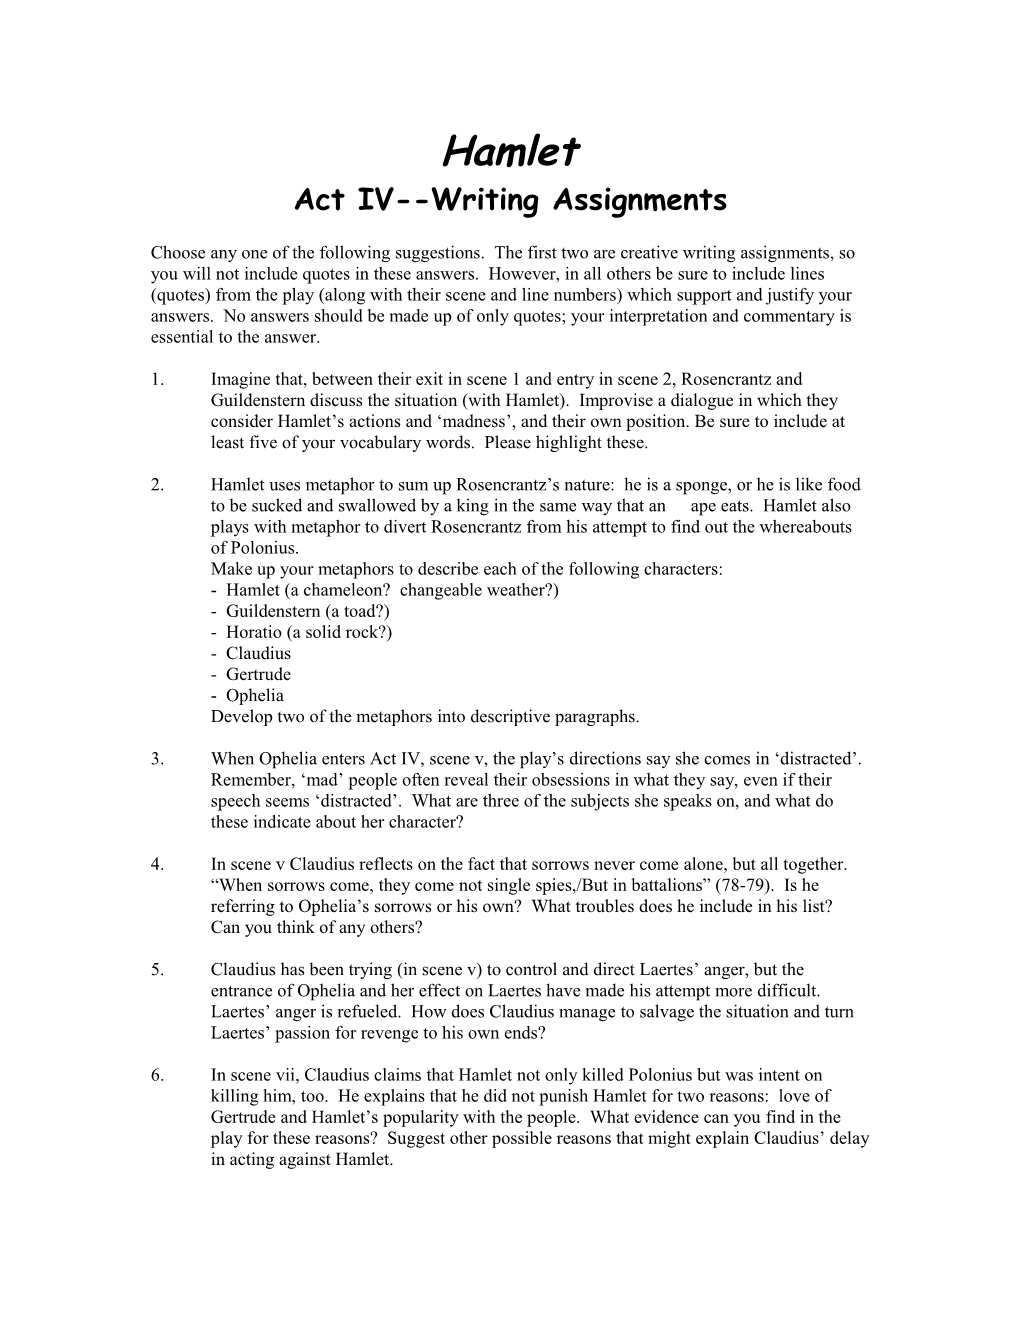 Act IV Writing Assignments